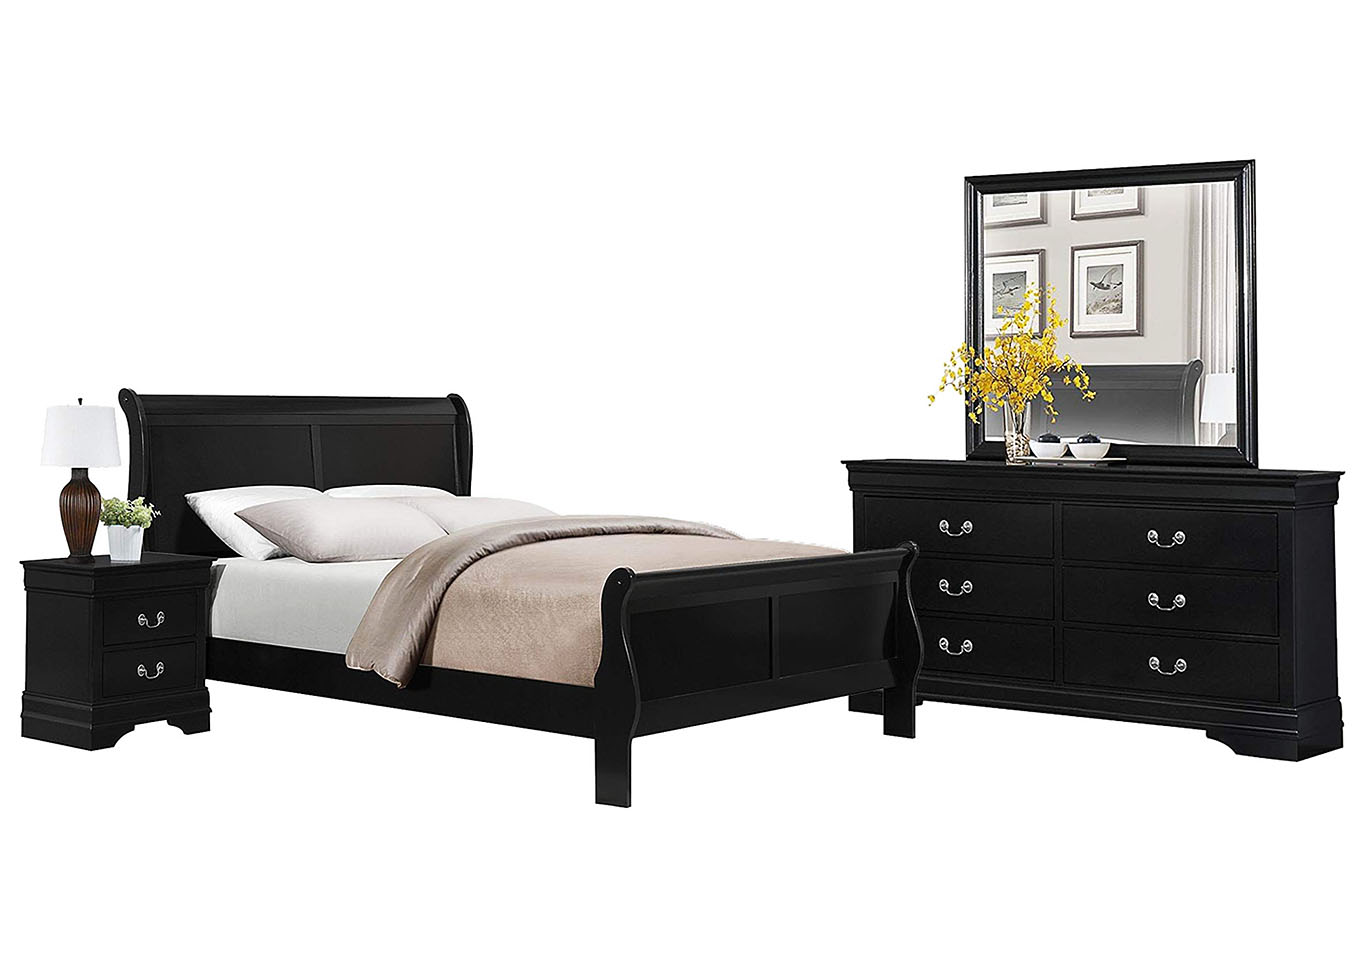 Louis Philippe King Size Bed – Black